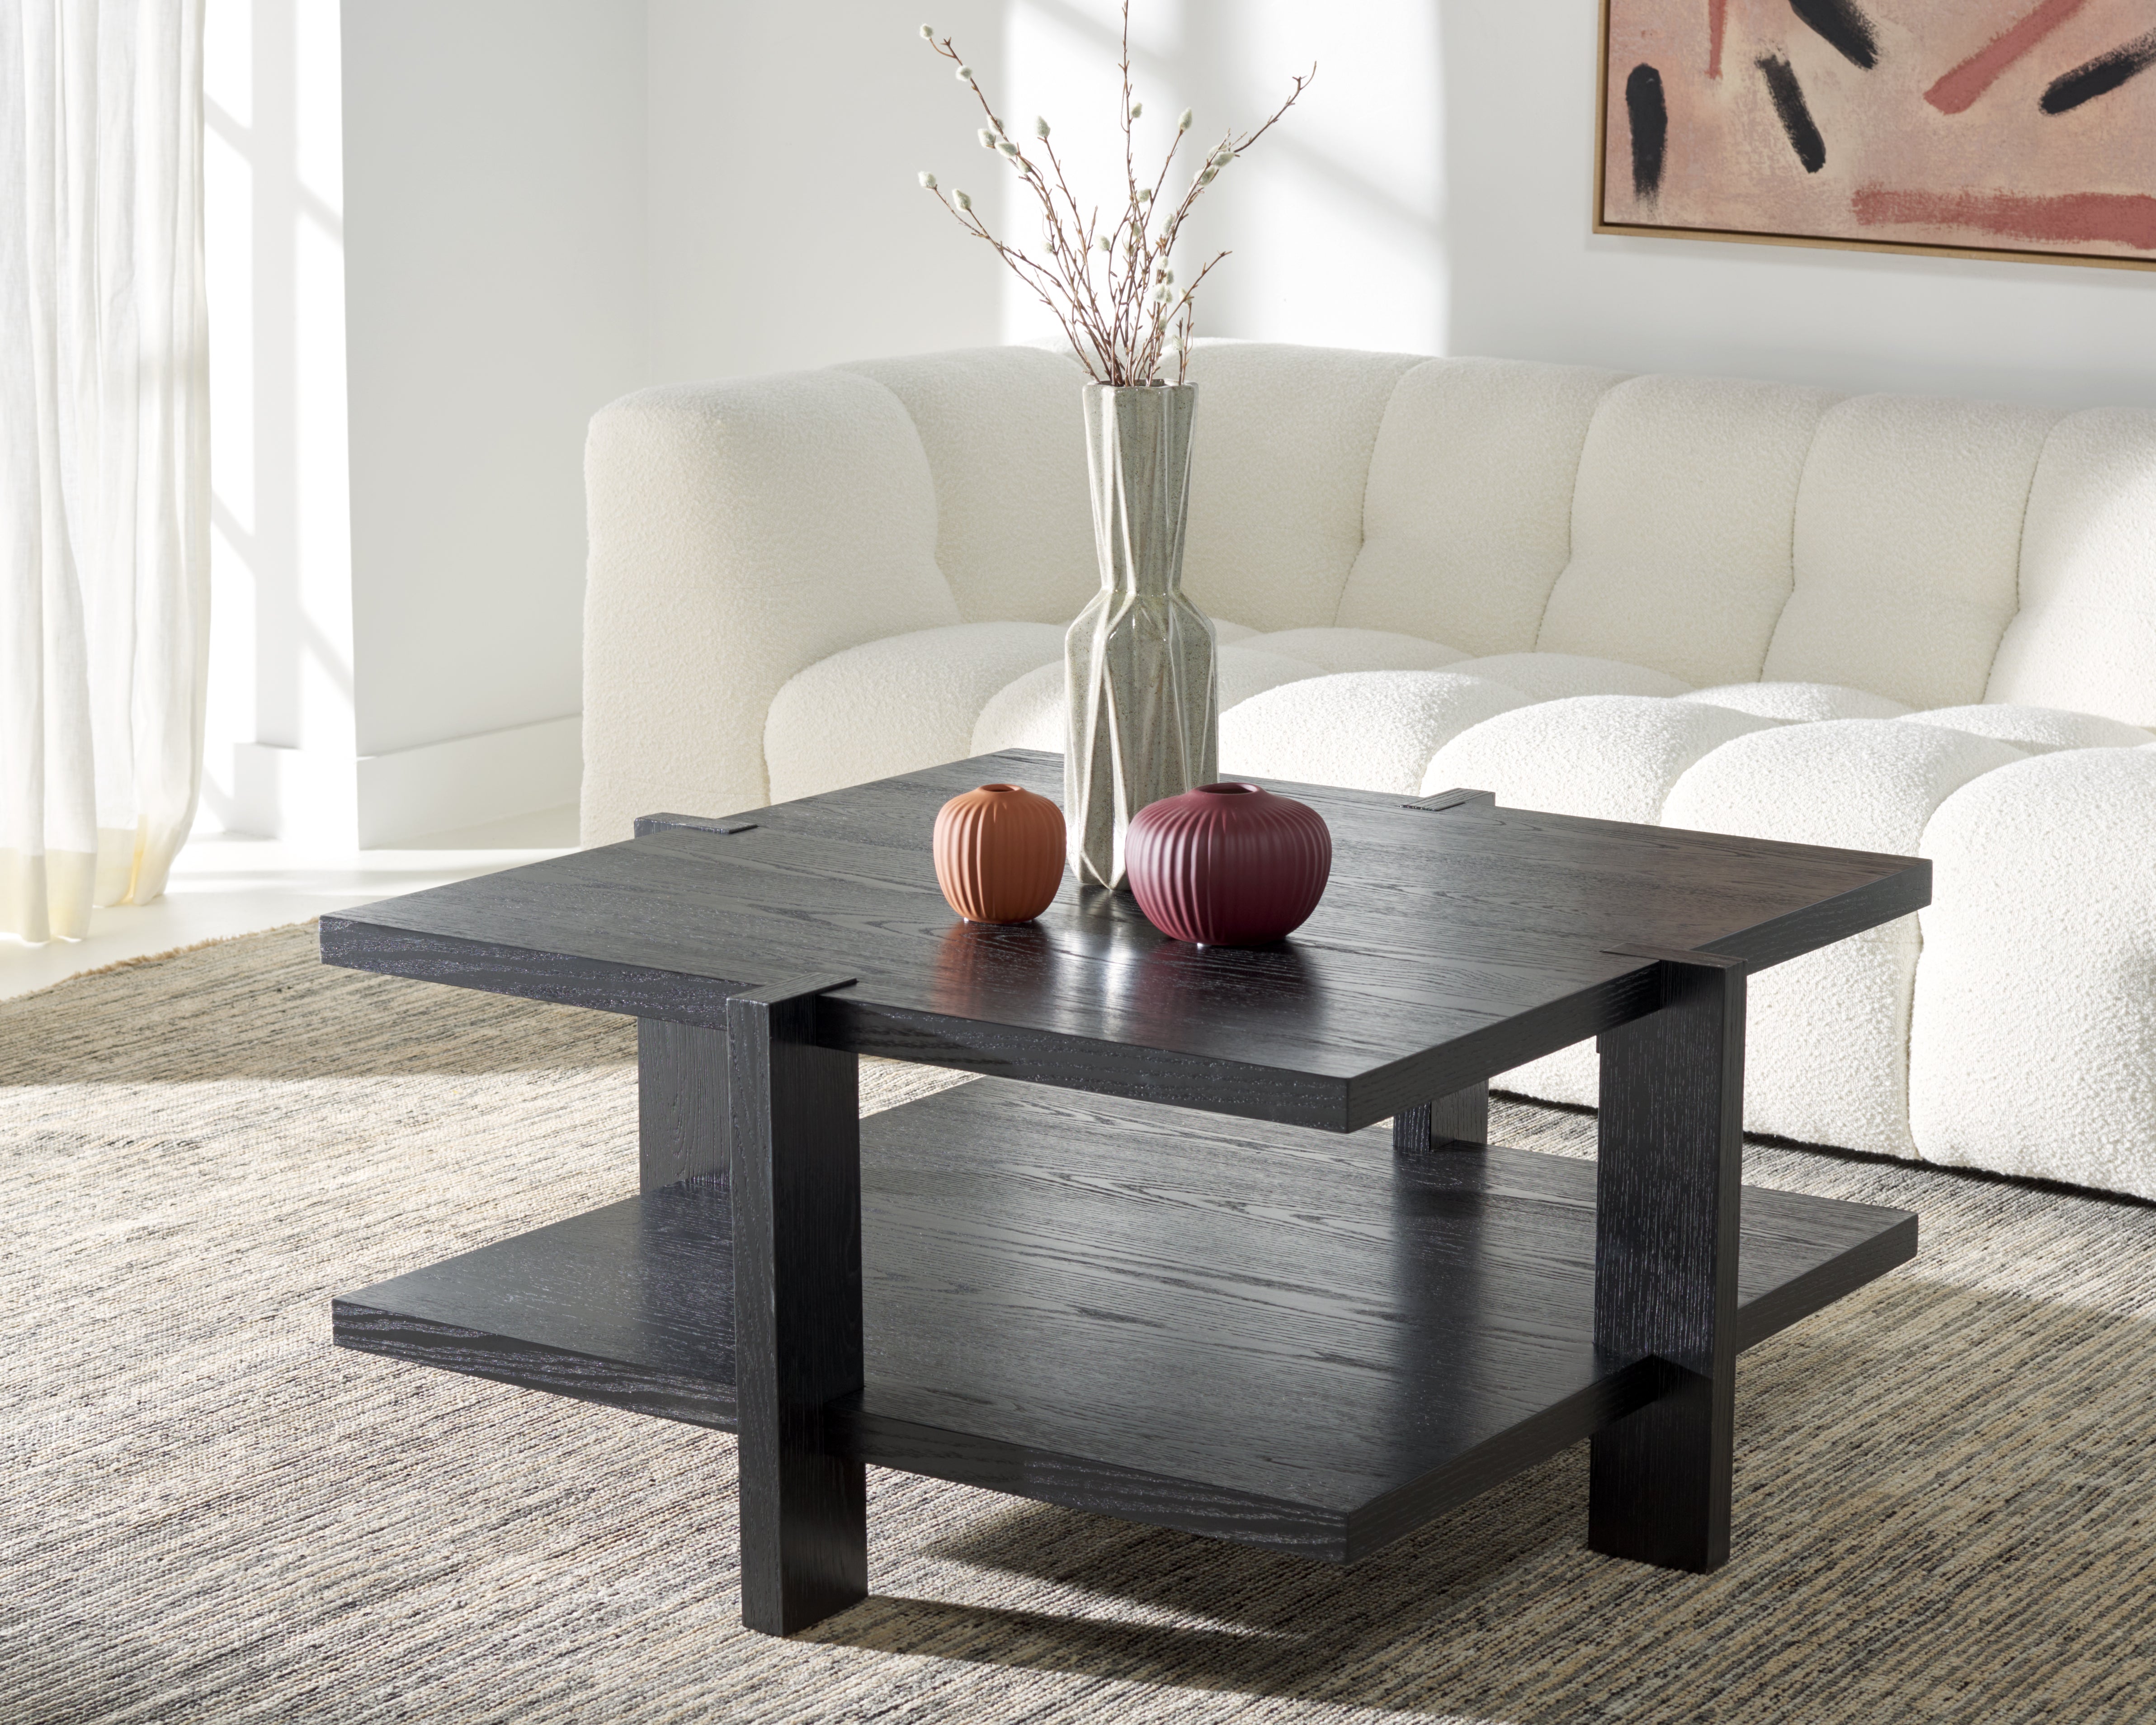 Safavieh Couture Quigley Square Wood Coffee Table, SFV2150